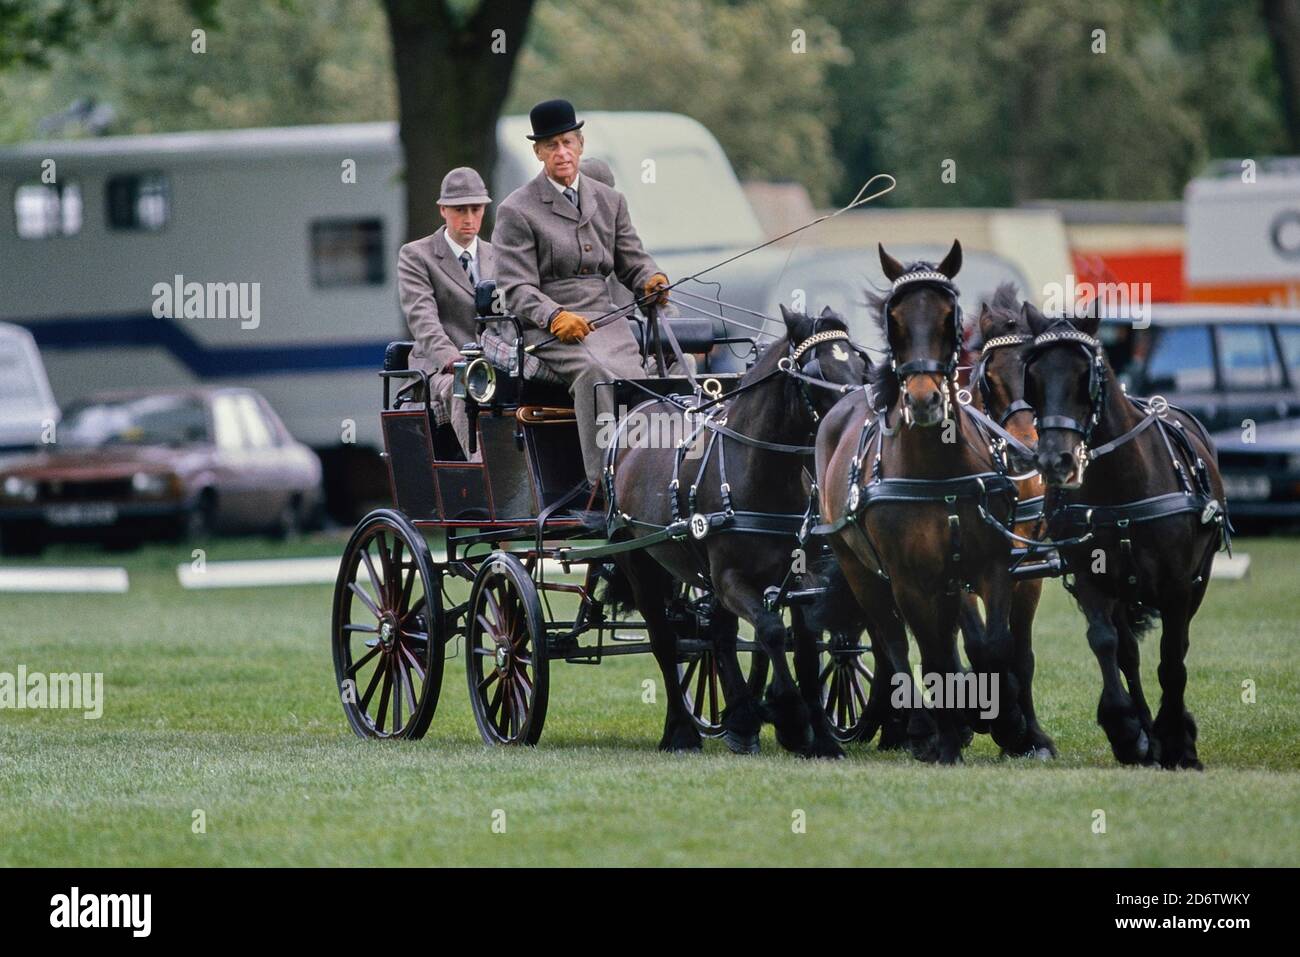 Prince Philip, Duke of Edinburgh competing in the dressage stage of the carriage riding championship. Royal Windsor Horse show. Berkshire, England, UK  Circa 1989 Stock Photo